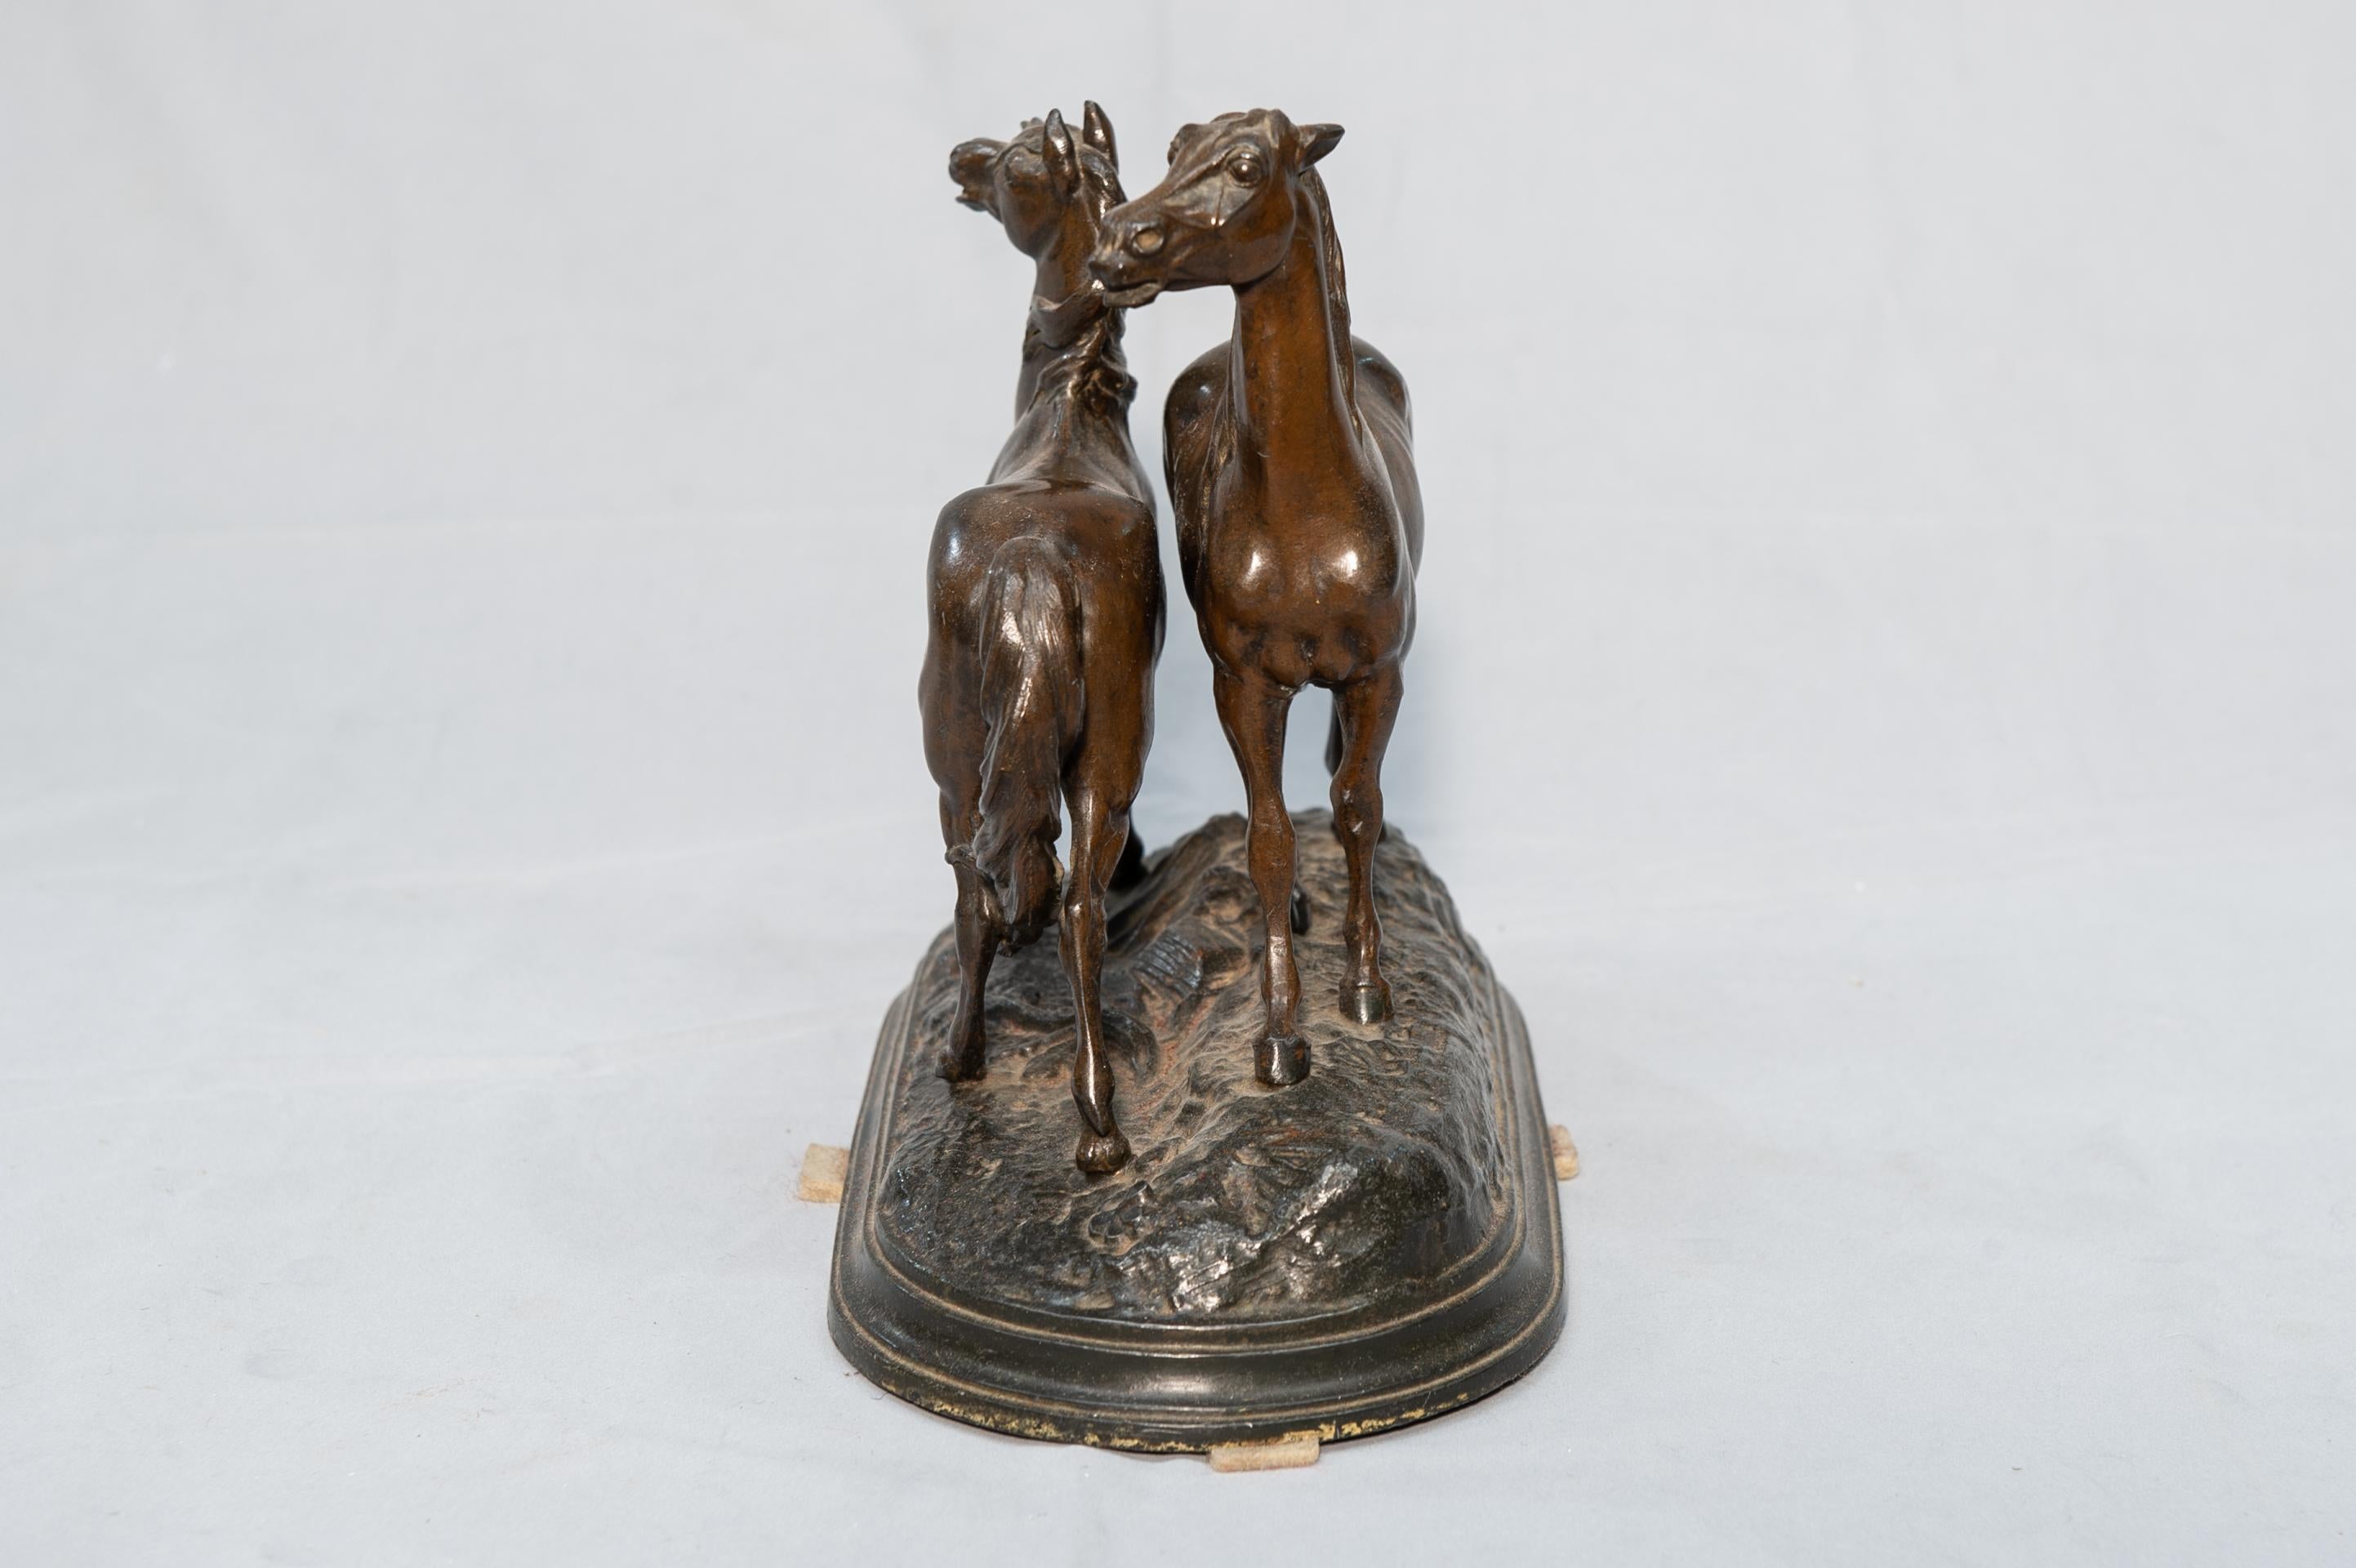 O/2677 - This horses statue is a league of bronze and perhaps antimony. May be it's more antique: end '800. 
For those who love horses these have a moving expression, although not large. 
Price is good.

 